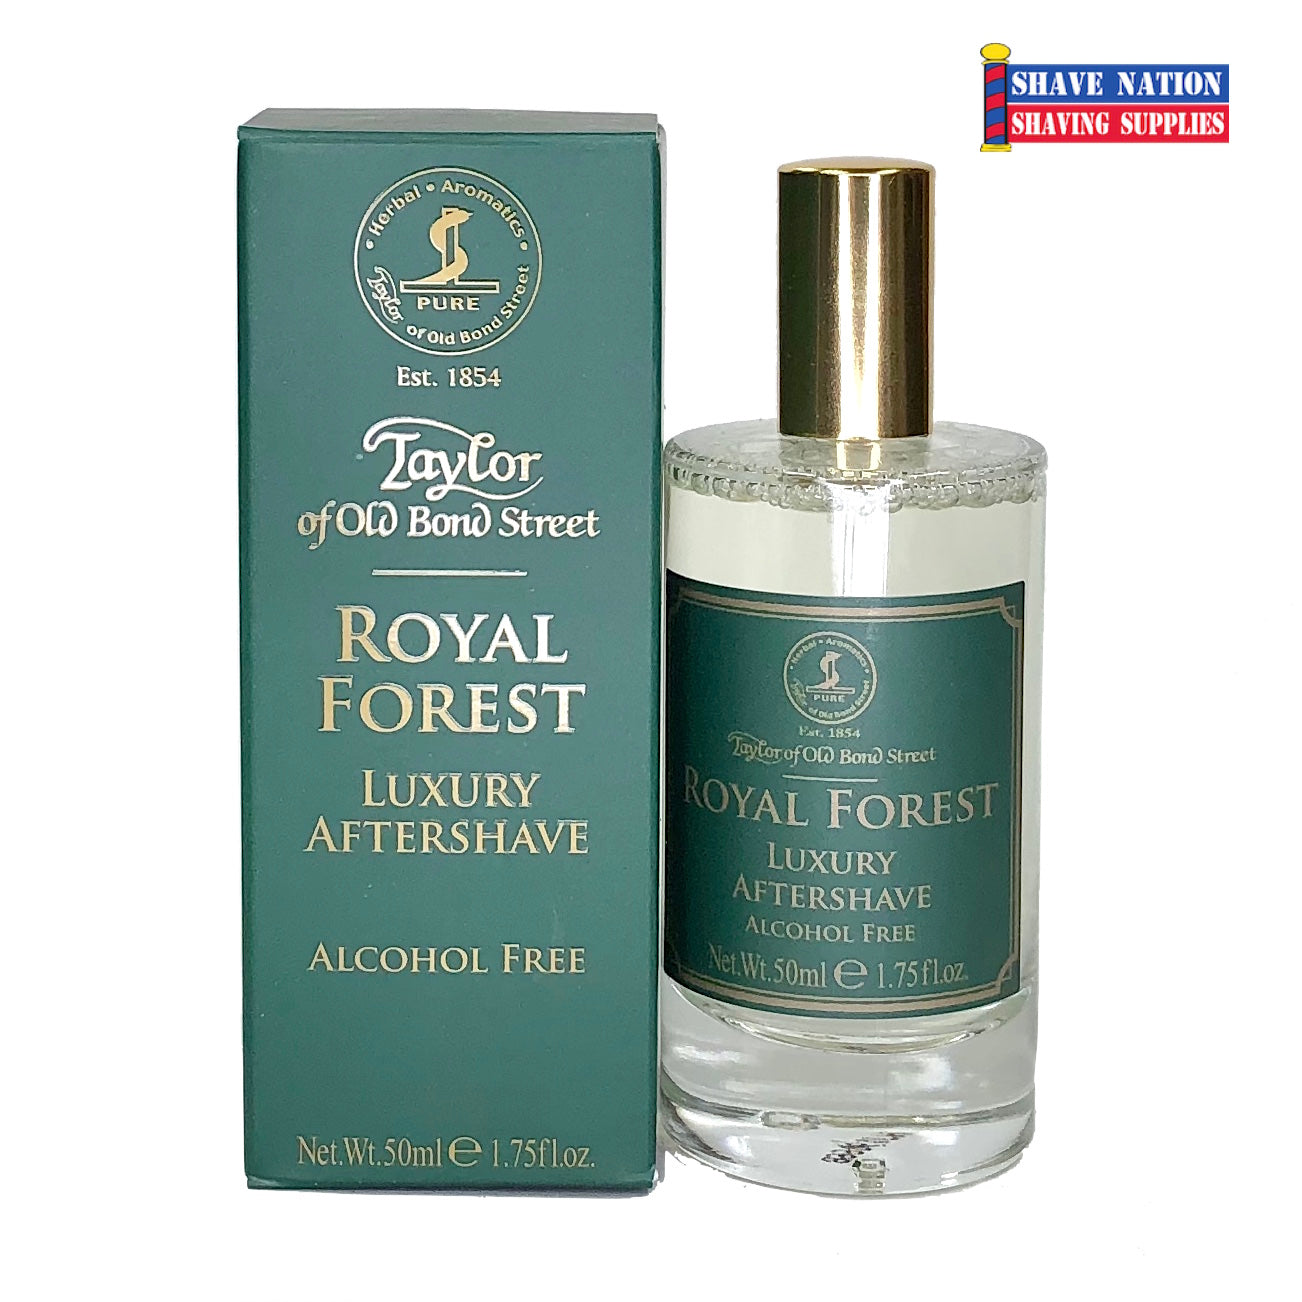 Taylor of Old Bond | Nation Luxury Supplies® Forest Aftershave Shave Shaving Street Royal Free (Alcohol